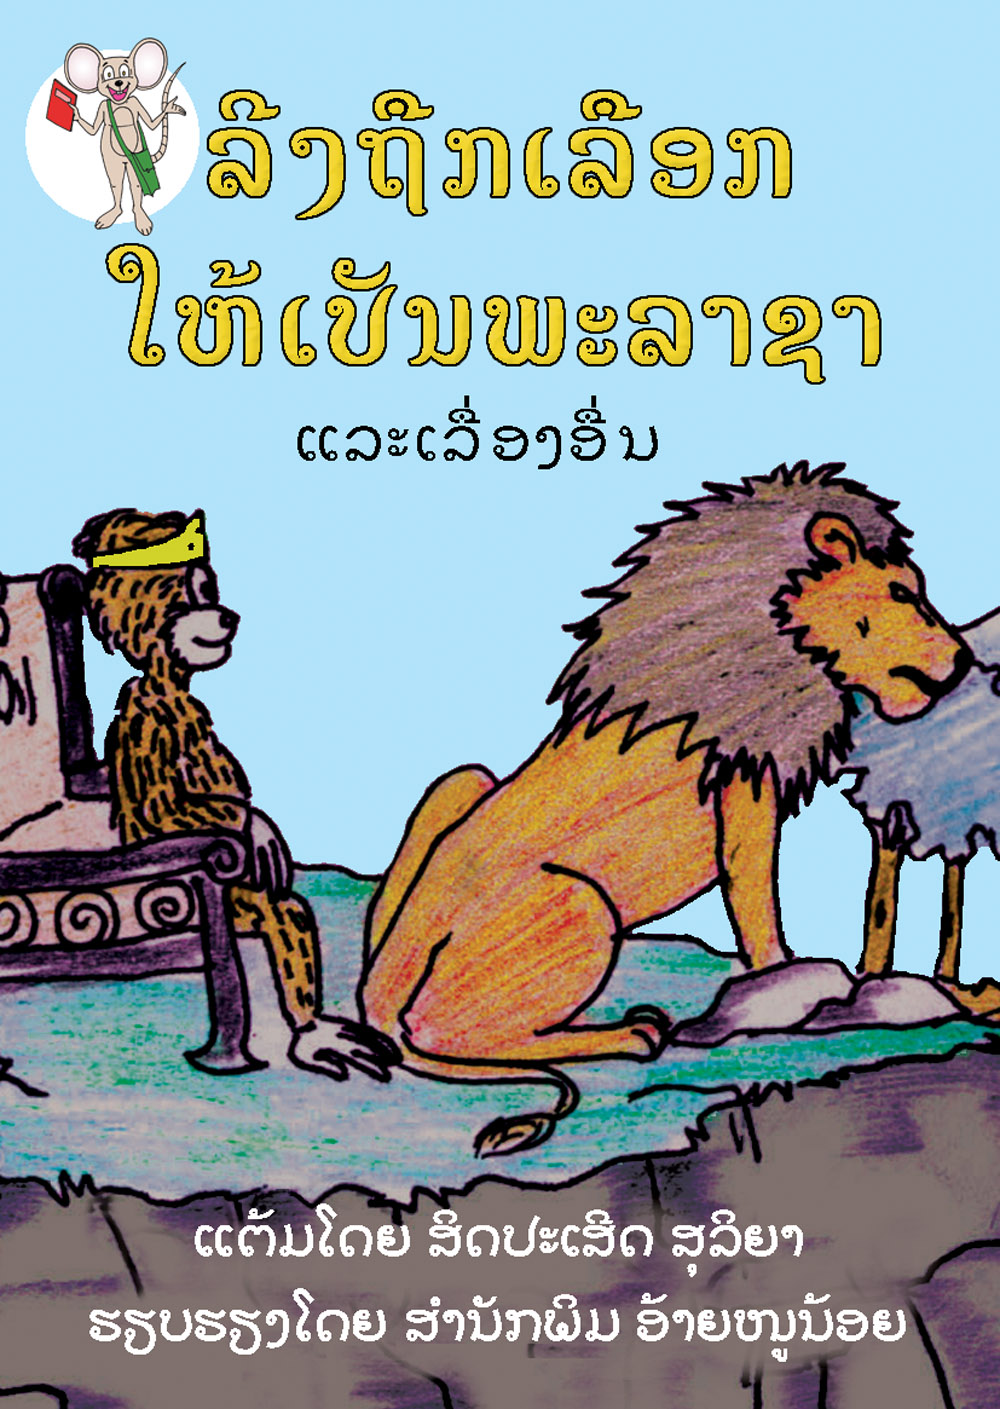 The Monkey is Elected to be King of the Animals large book cover, published in Lao language